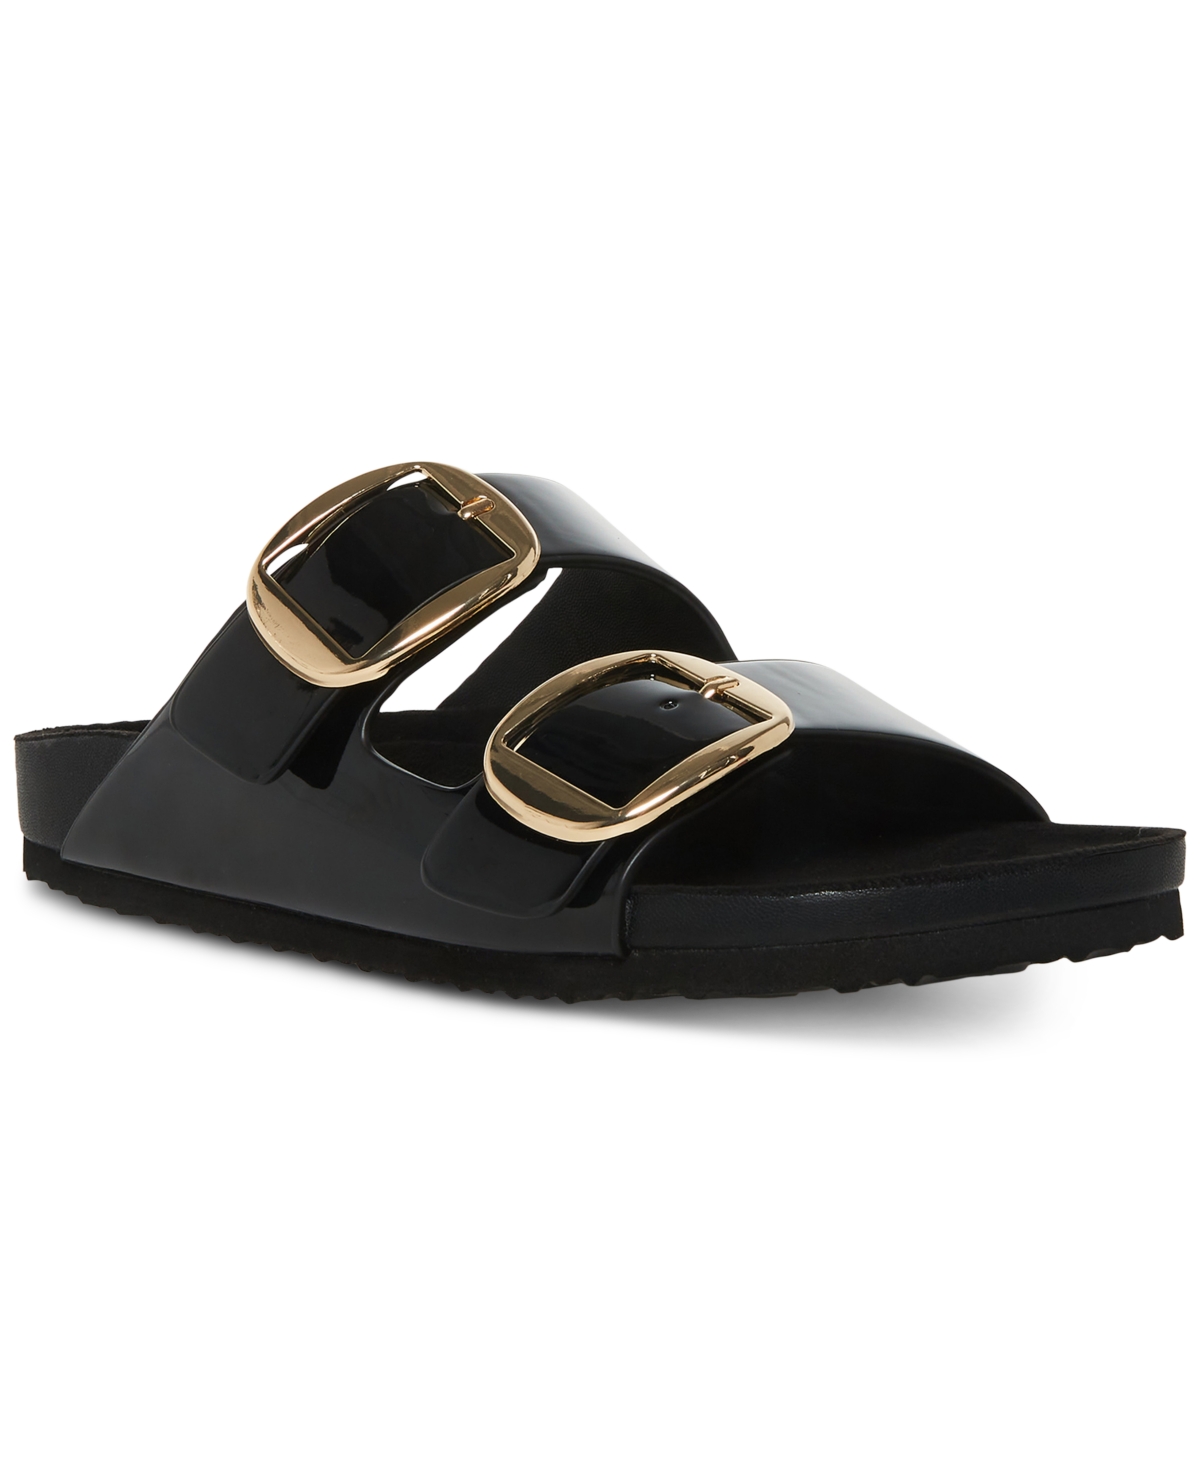 Madden Girl Bodie Buckle Footbed Slide Sandals In Black Box Patent